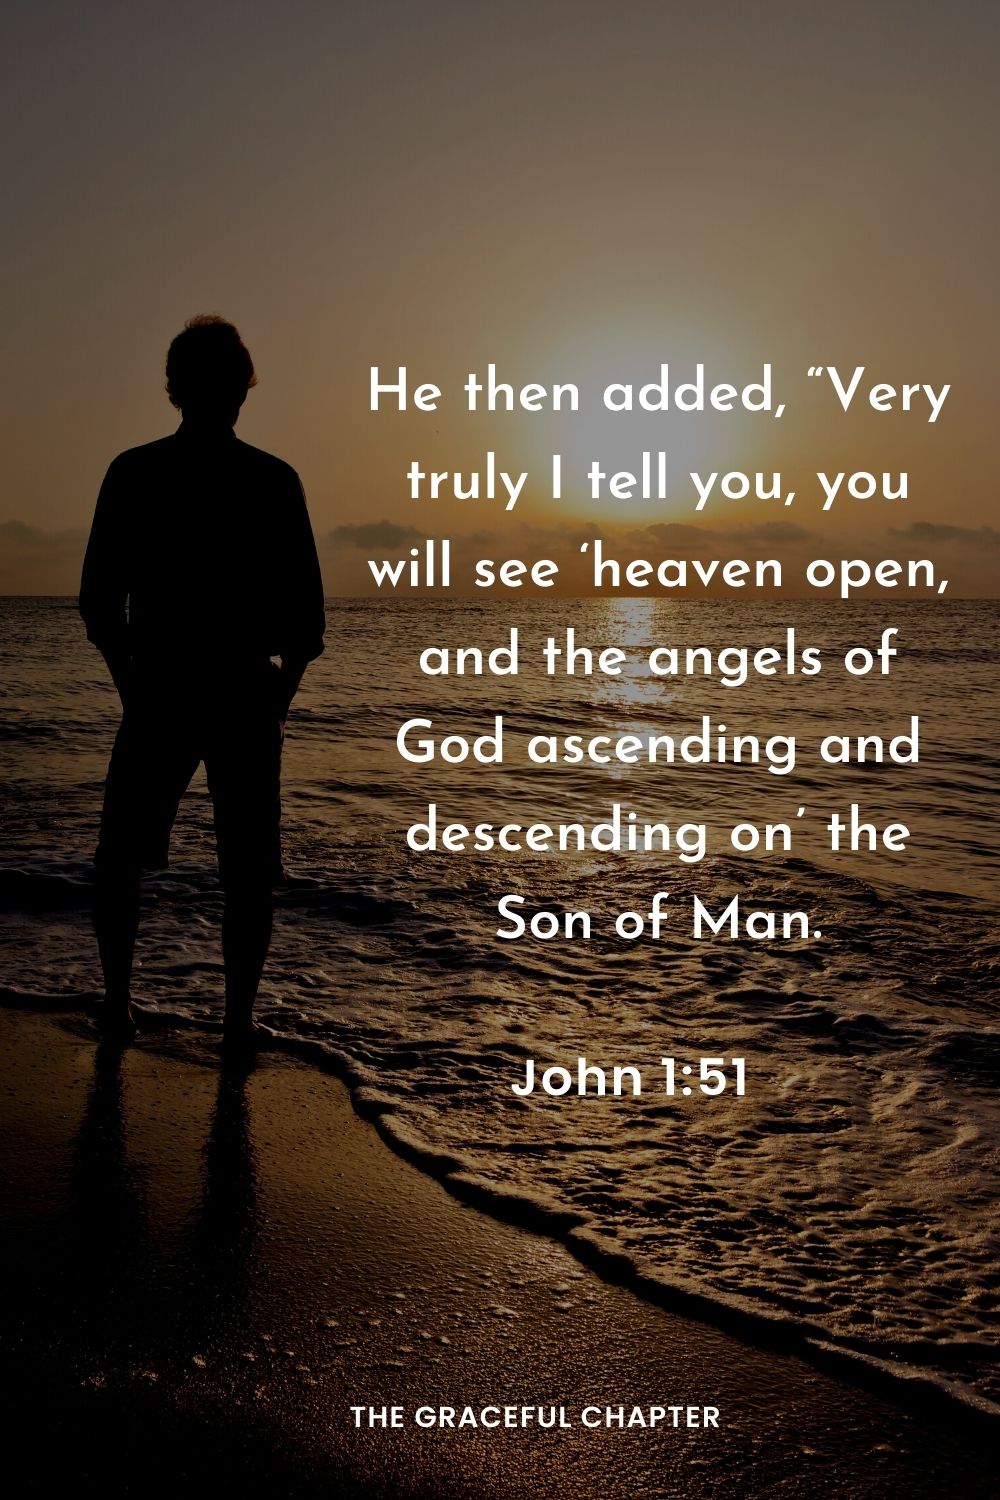 He then added, “Very truly I tell you, you will see ‘heaven open, and the angels of God ascending and descending on’ the Son of Man.